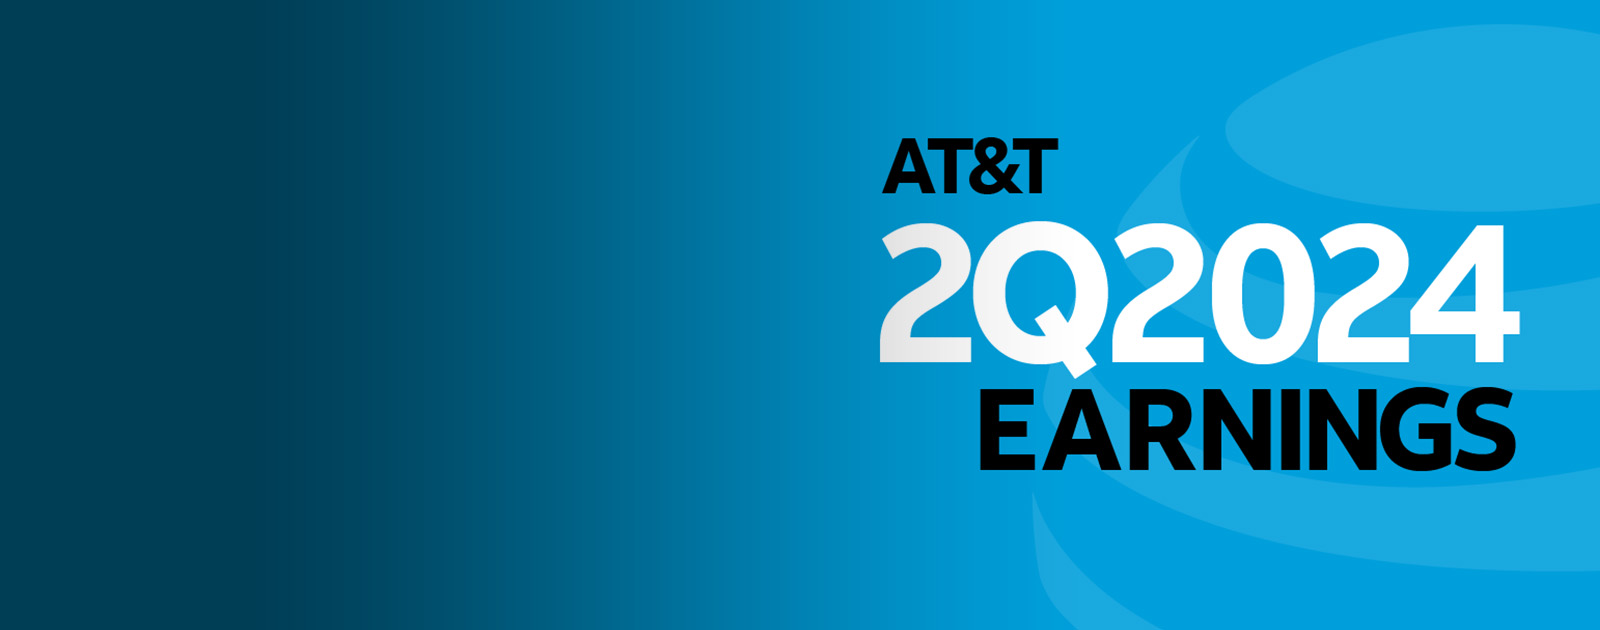 AT&T 2Q2024 EARNINGS